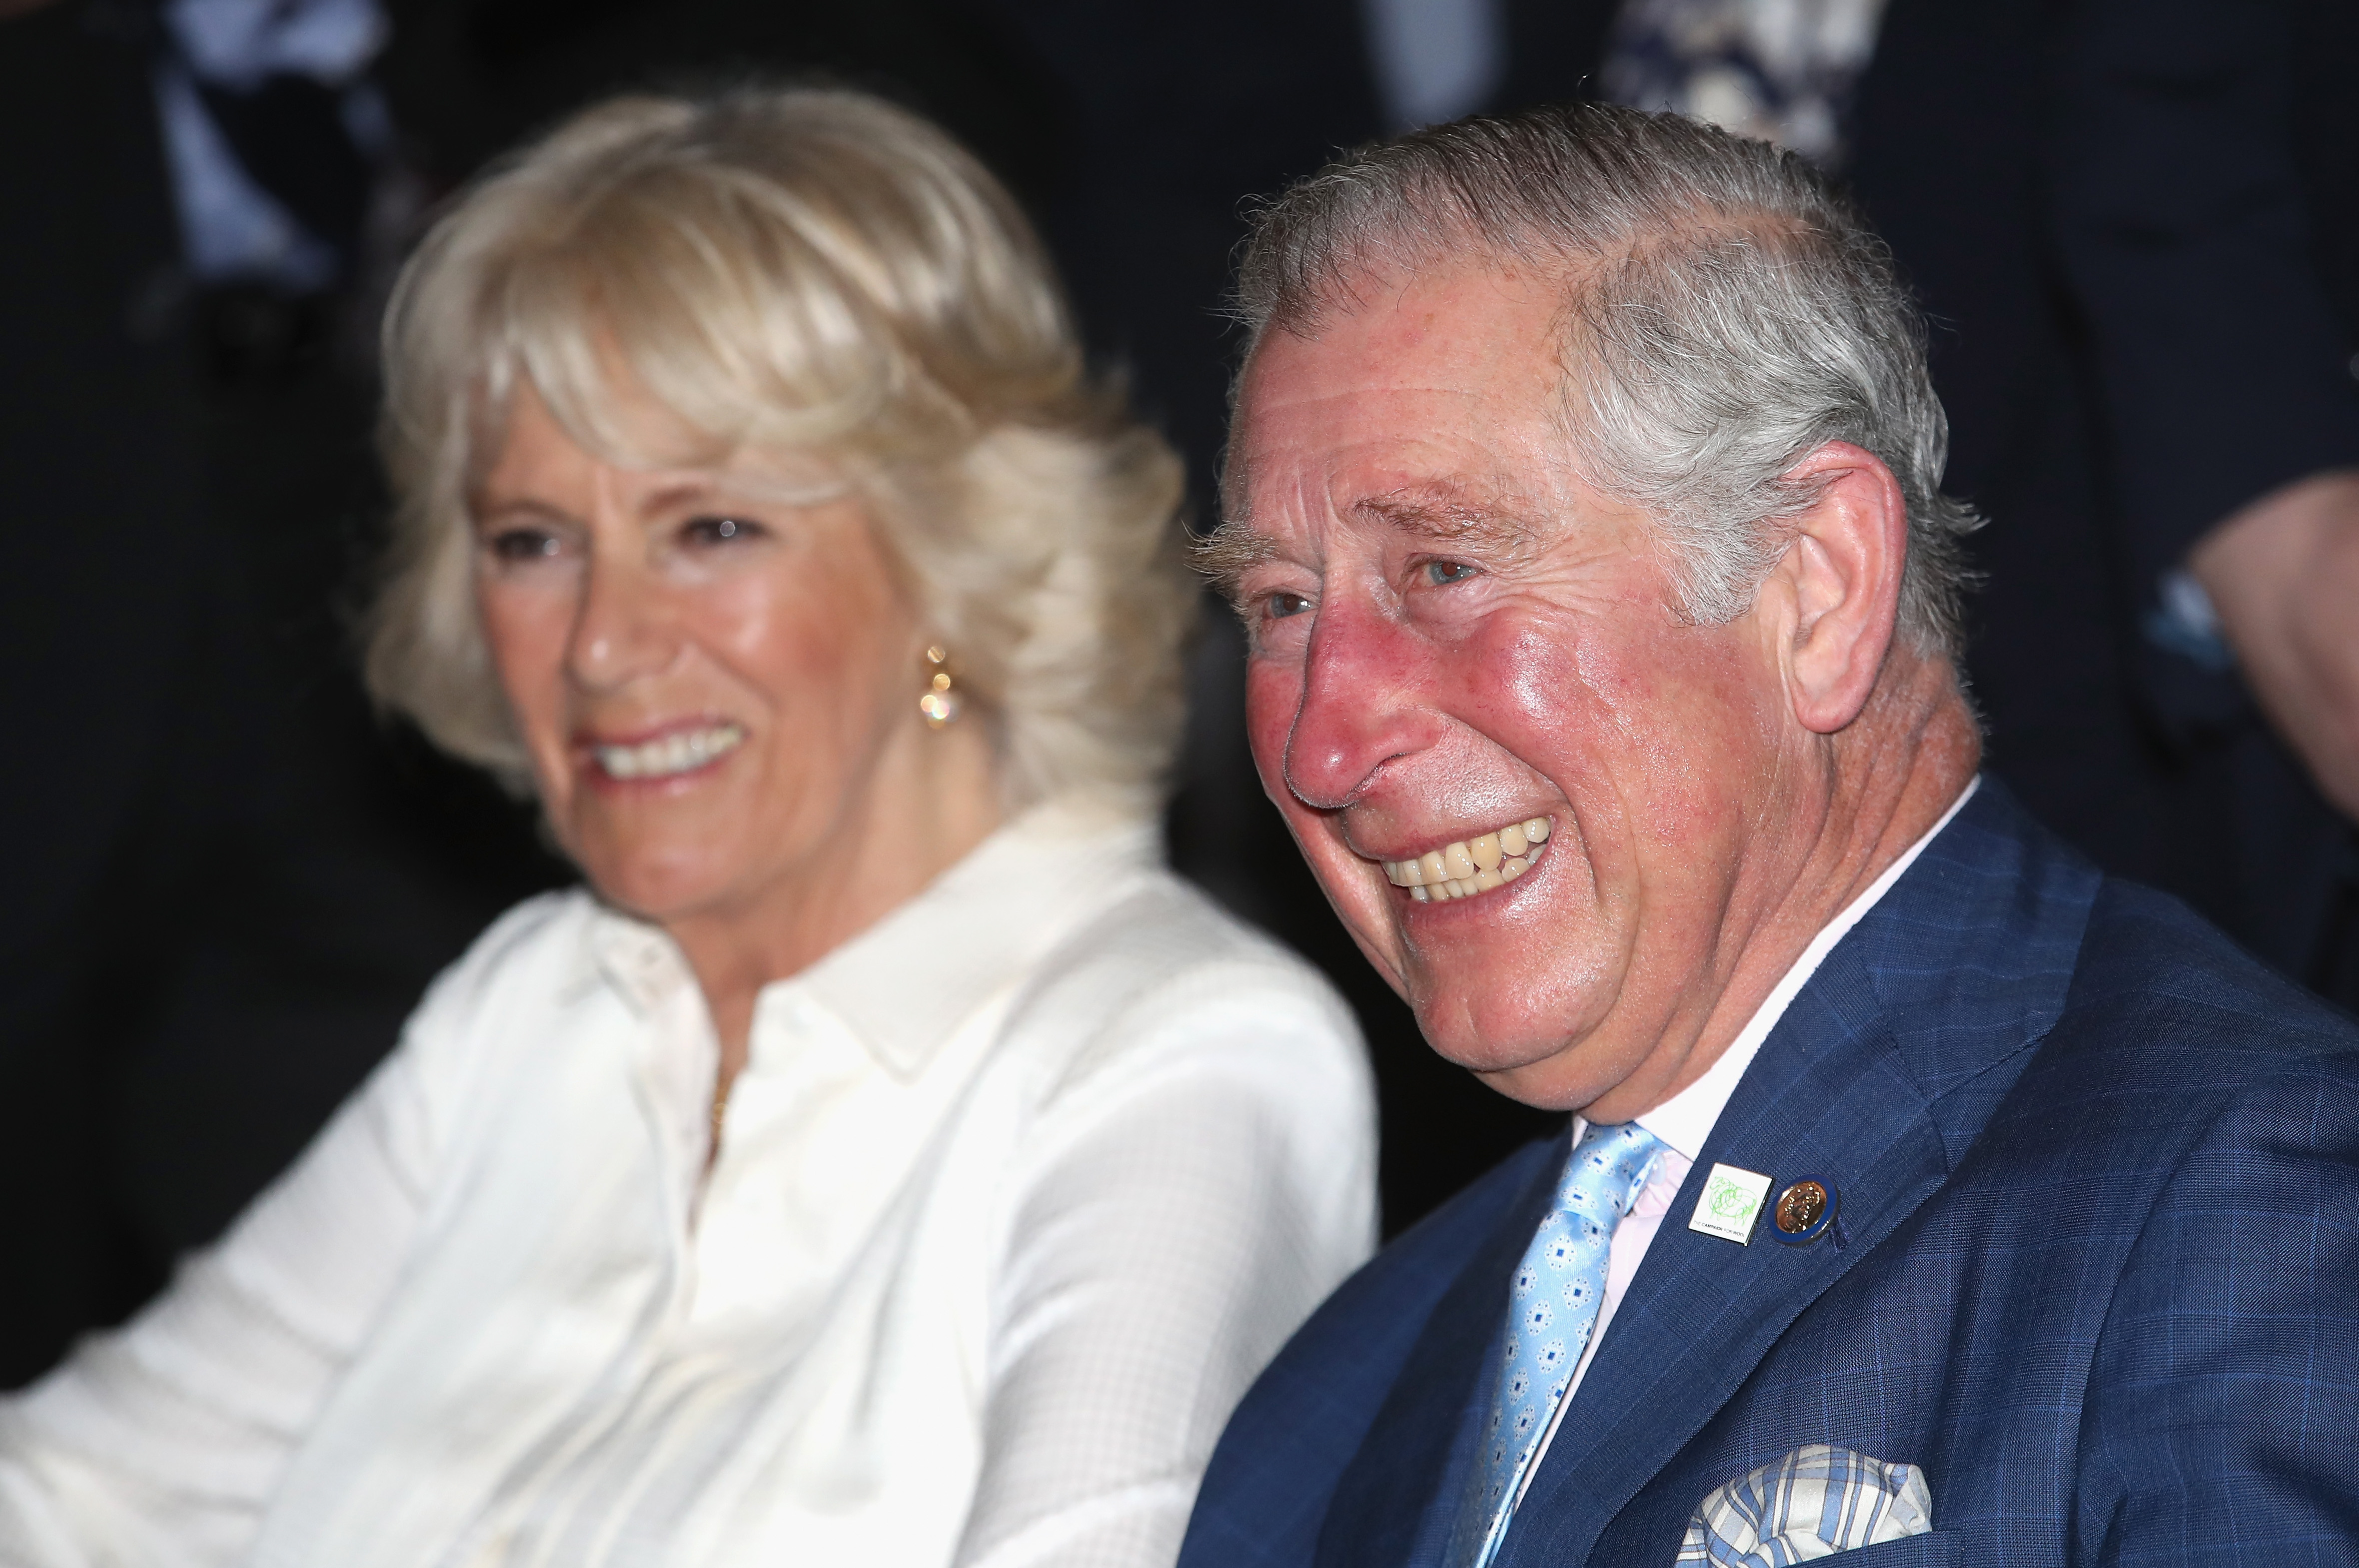 Prince Charles, Prince of Wales and Camilla, Duchess of Cornwall visit Sant'Ambrogio Market to celebrate the Slow Food movement, in Florence, Italy, on April 3, 2017. | Source: Getty Images